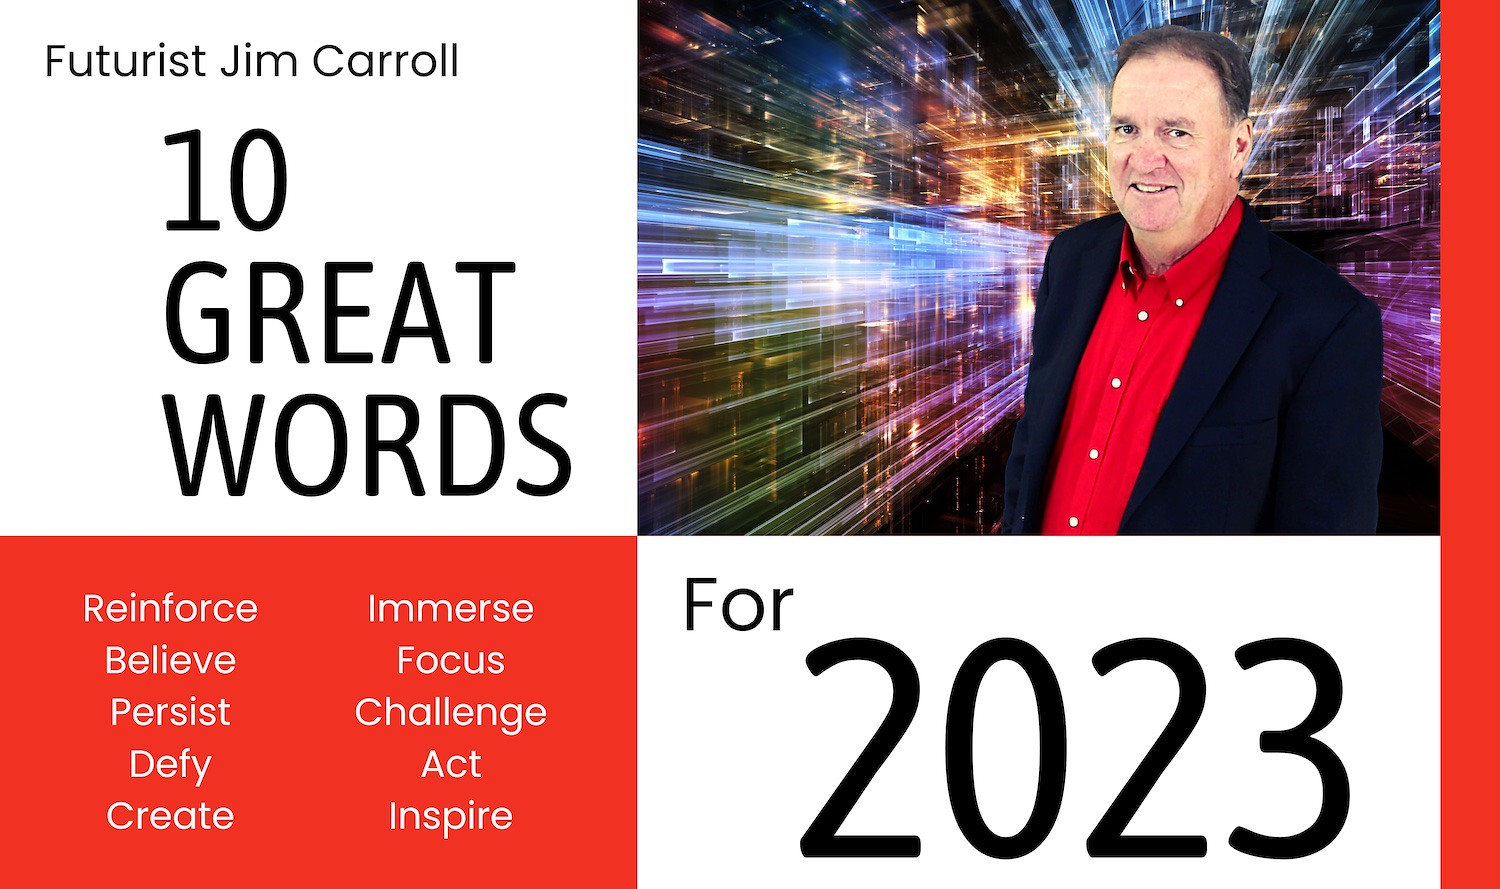 "10 Great Words for 2023 - Reinforce, Believe, Persist, Defy, Create, Immerse, Focus, Challenge, Act, Inspire!" - Futurist Jim Carroll